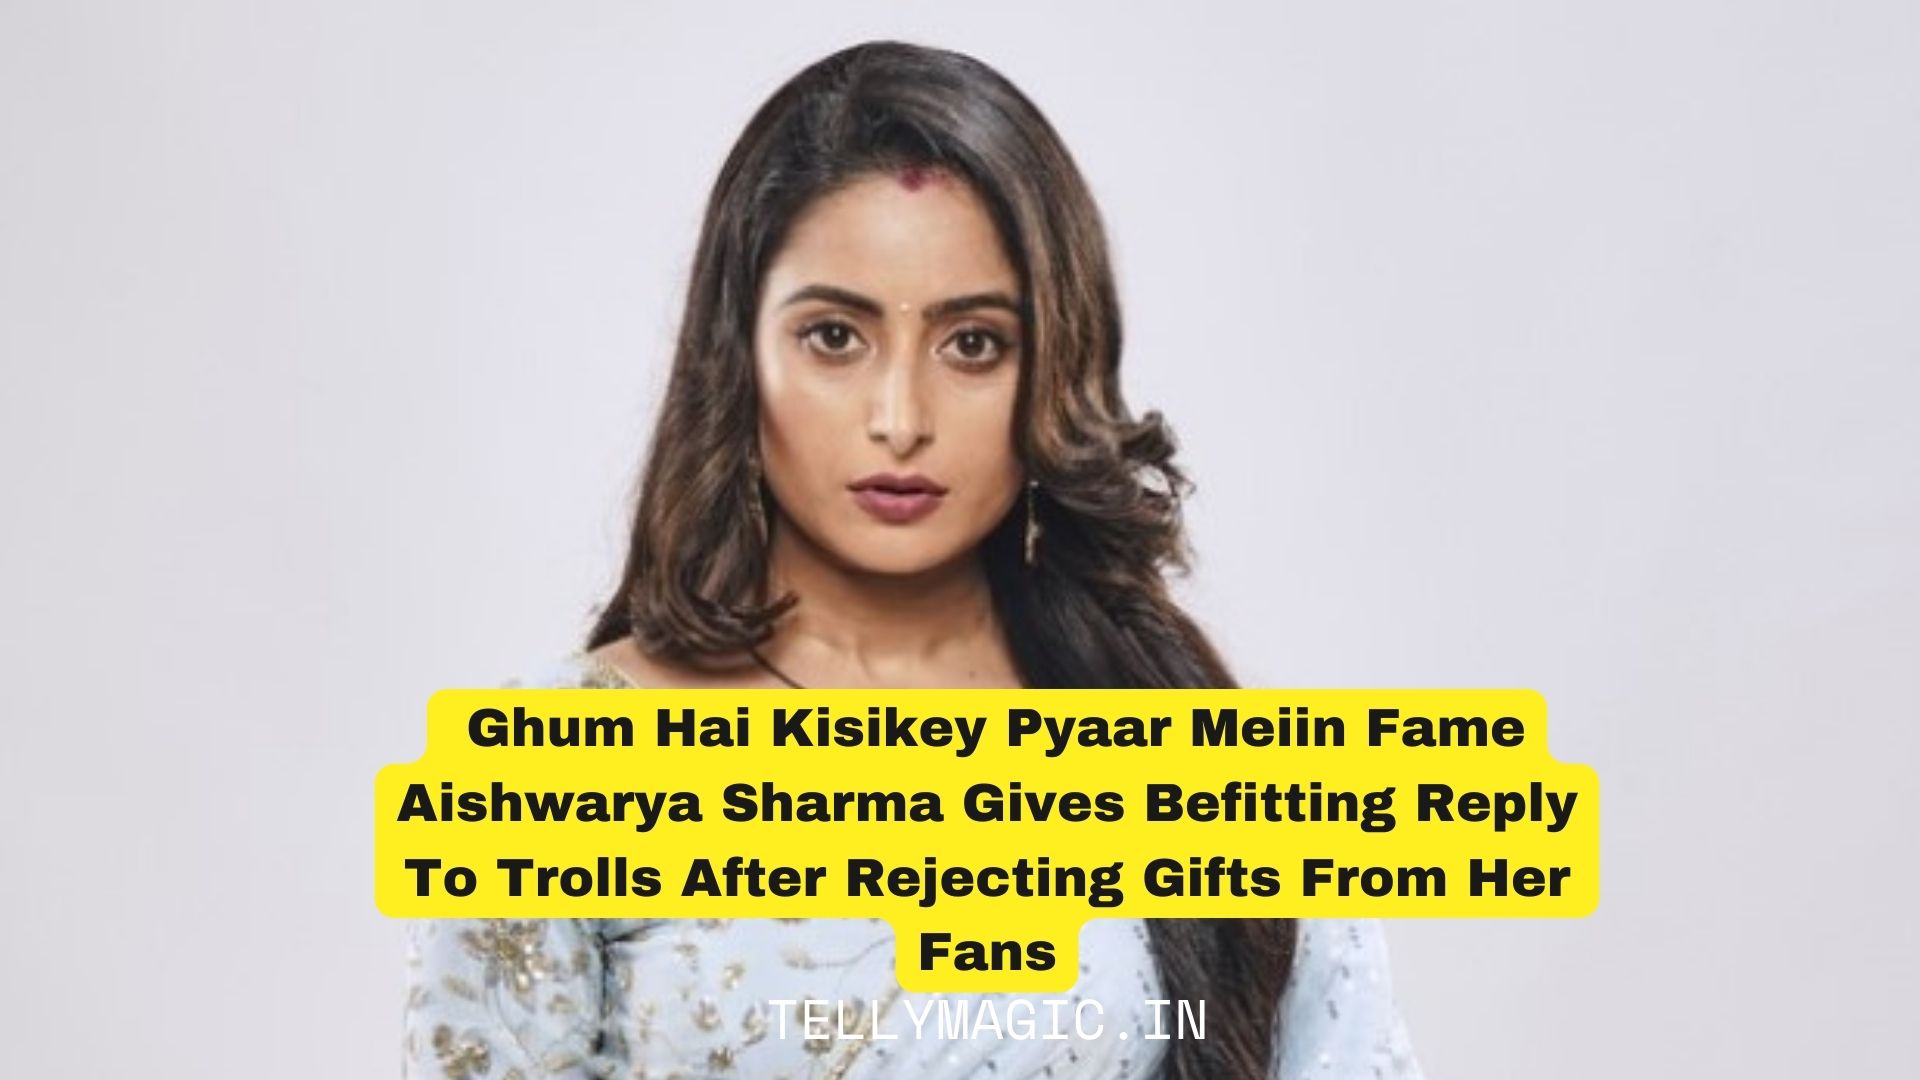 Ghum Hai Kisikey Pyaar Meiin Fame Aishwarya Sharma Gives Befitting Reply To Trolls After Rejecting Gifts From Her Fans